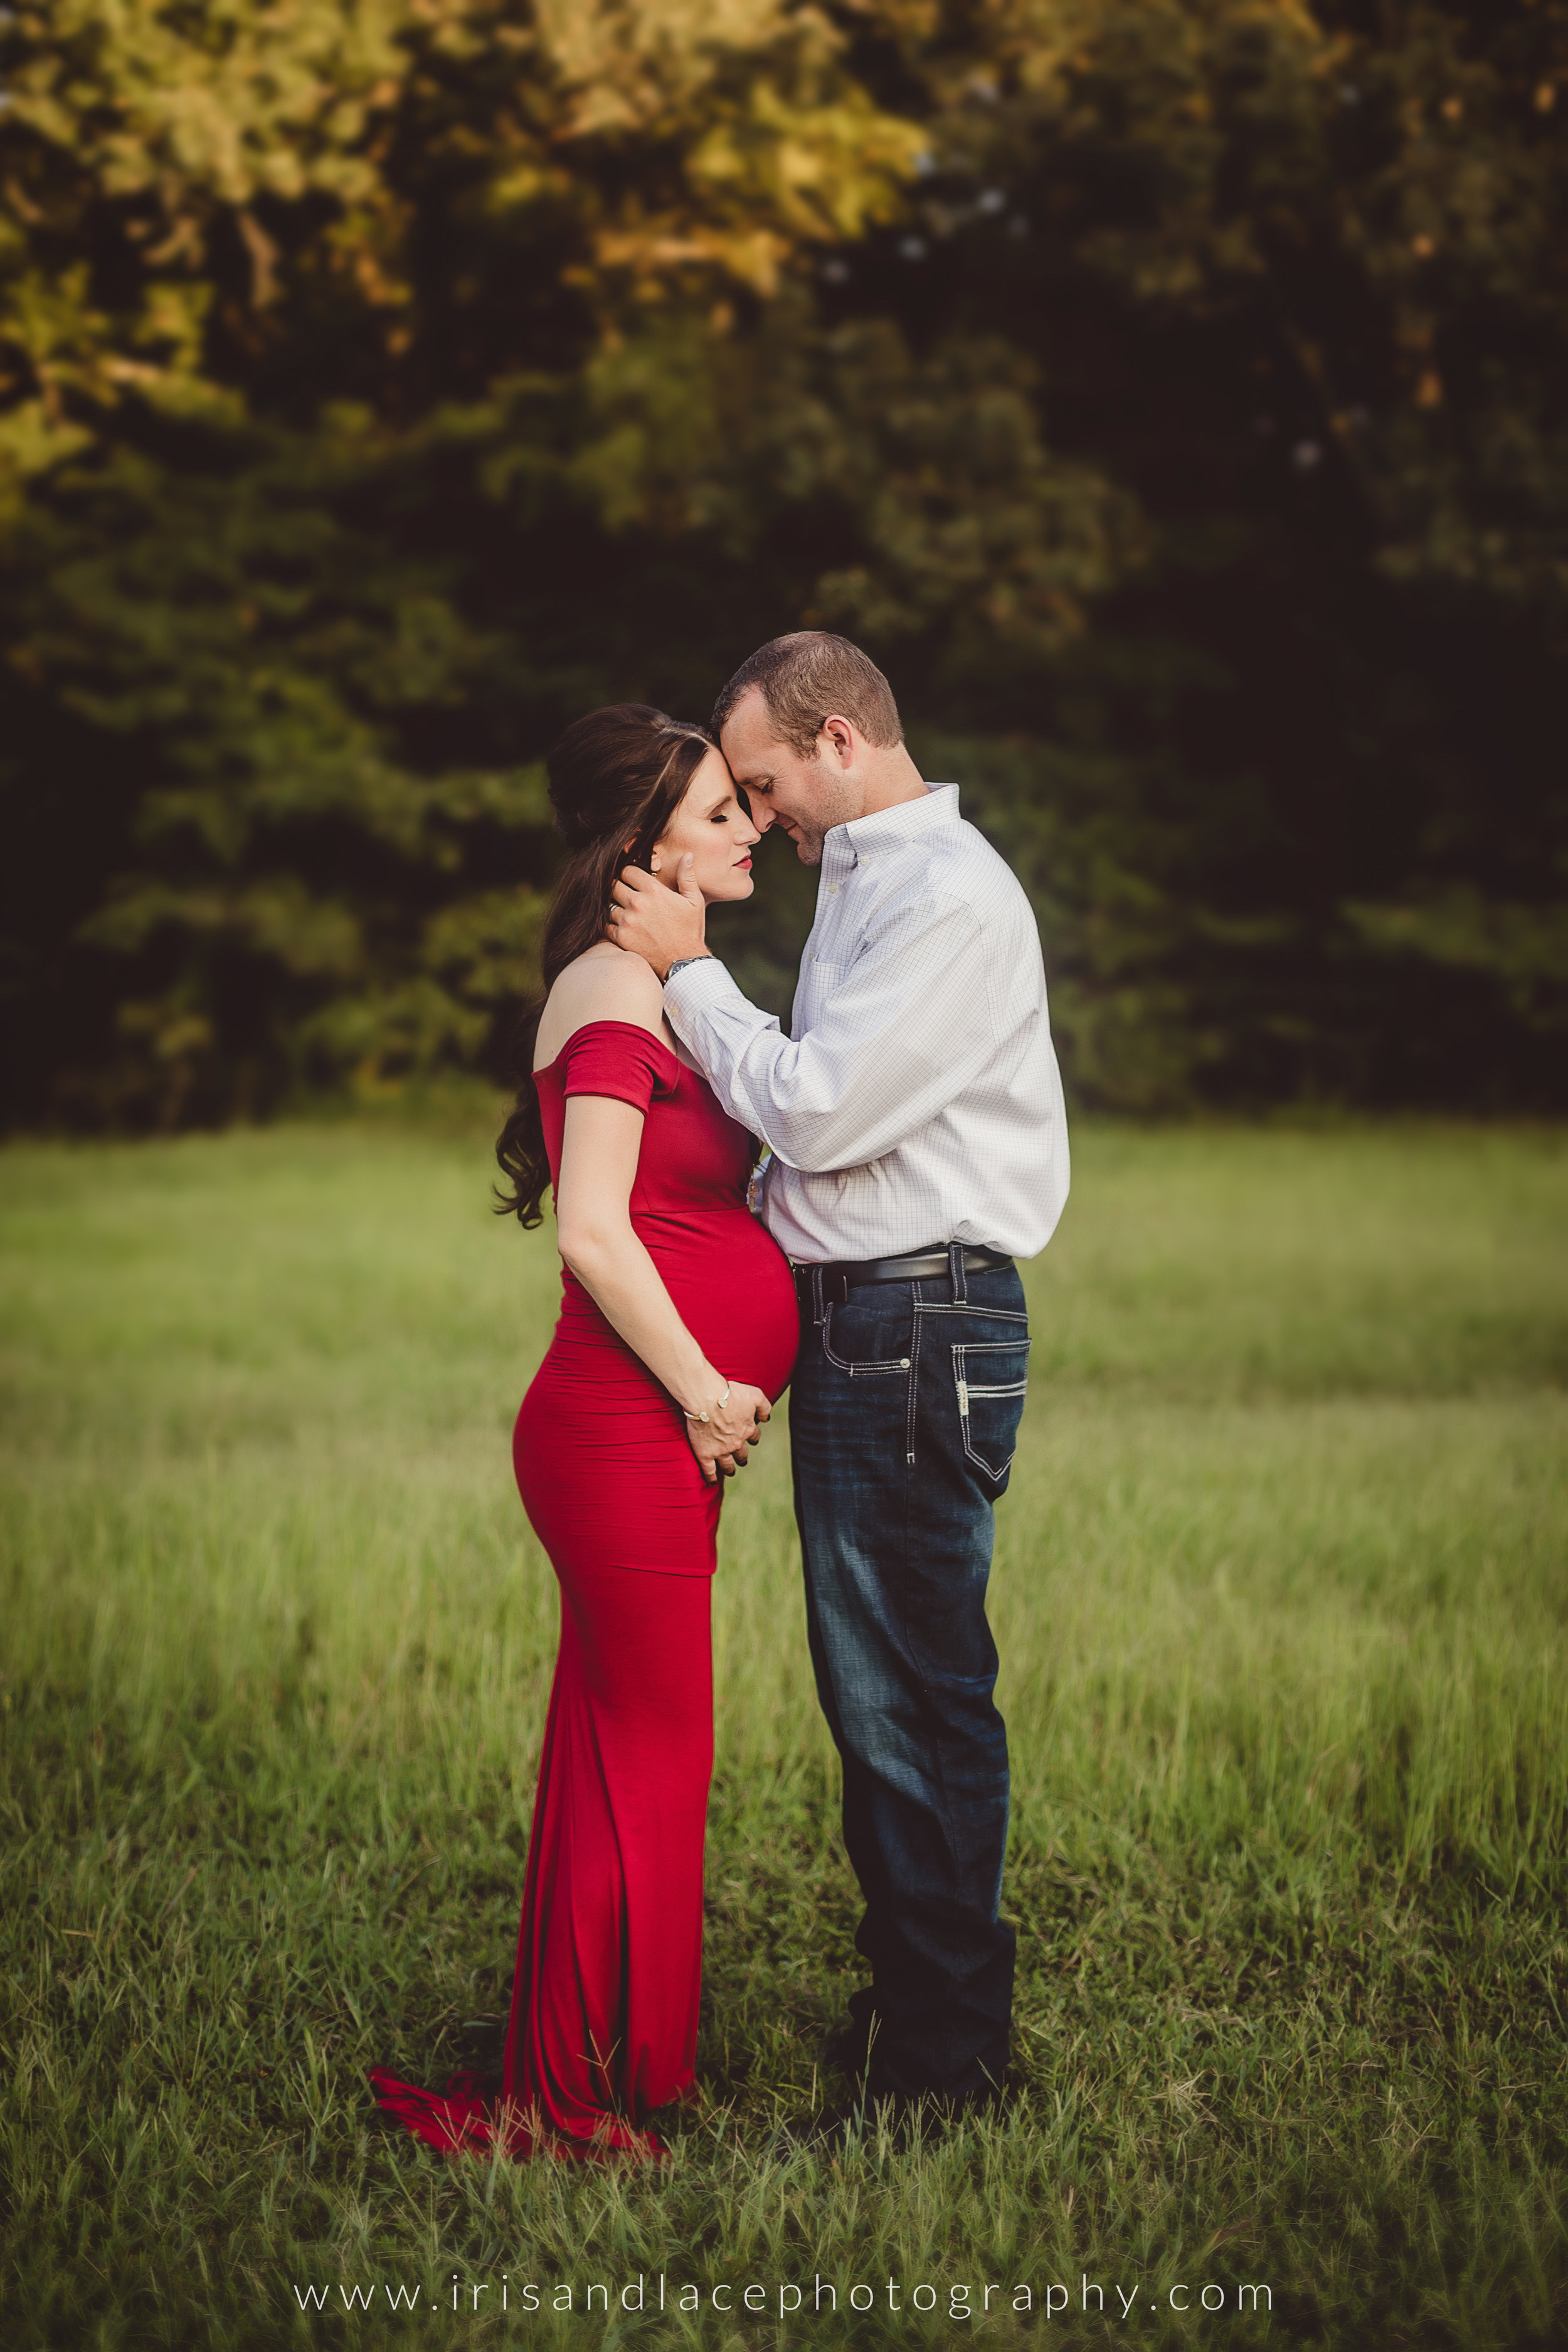 Maternity Photography Session San Francisco Bay Area Photographer Iris And Lace Photography